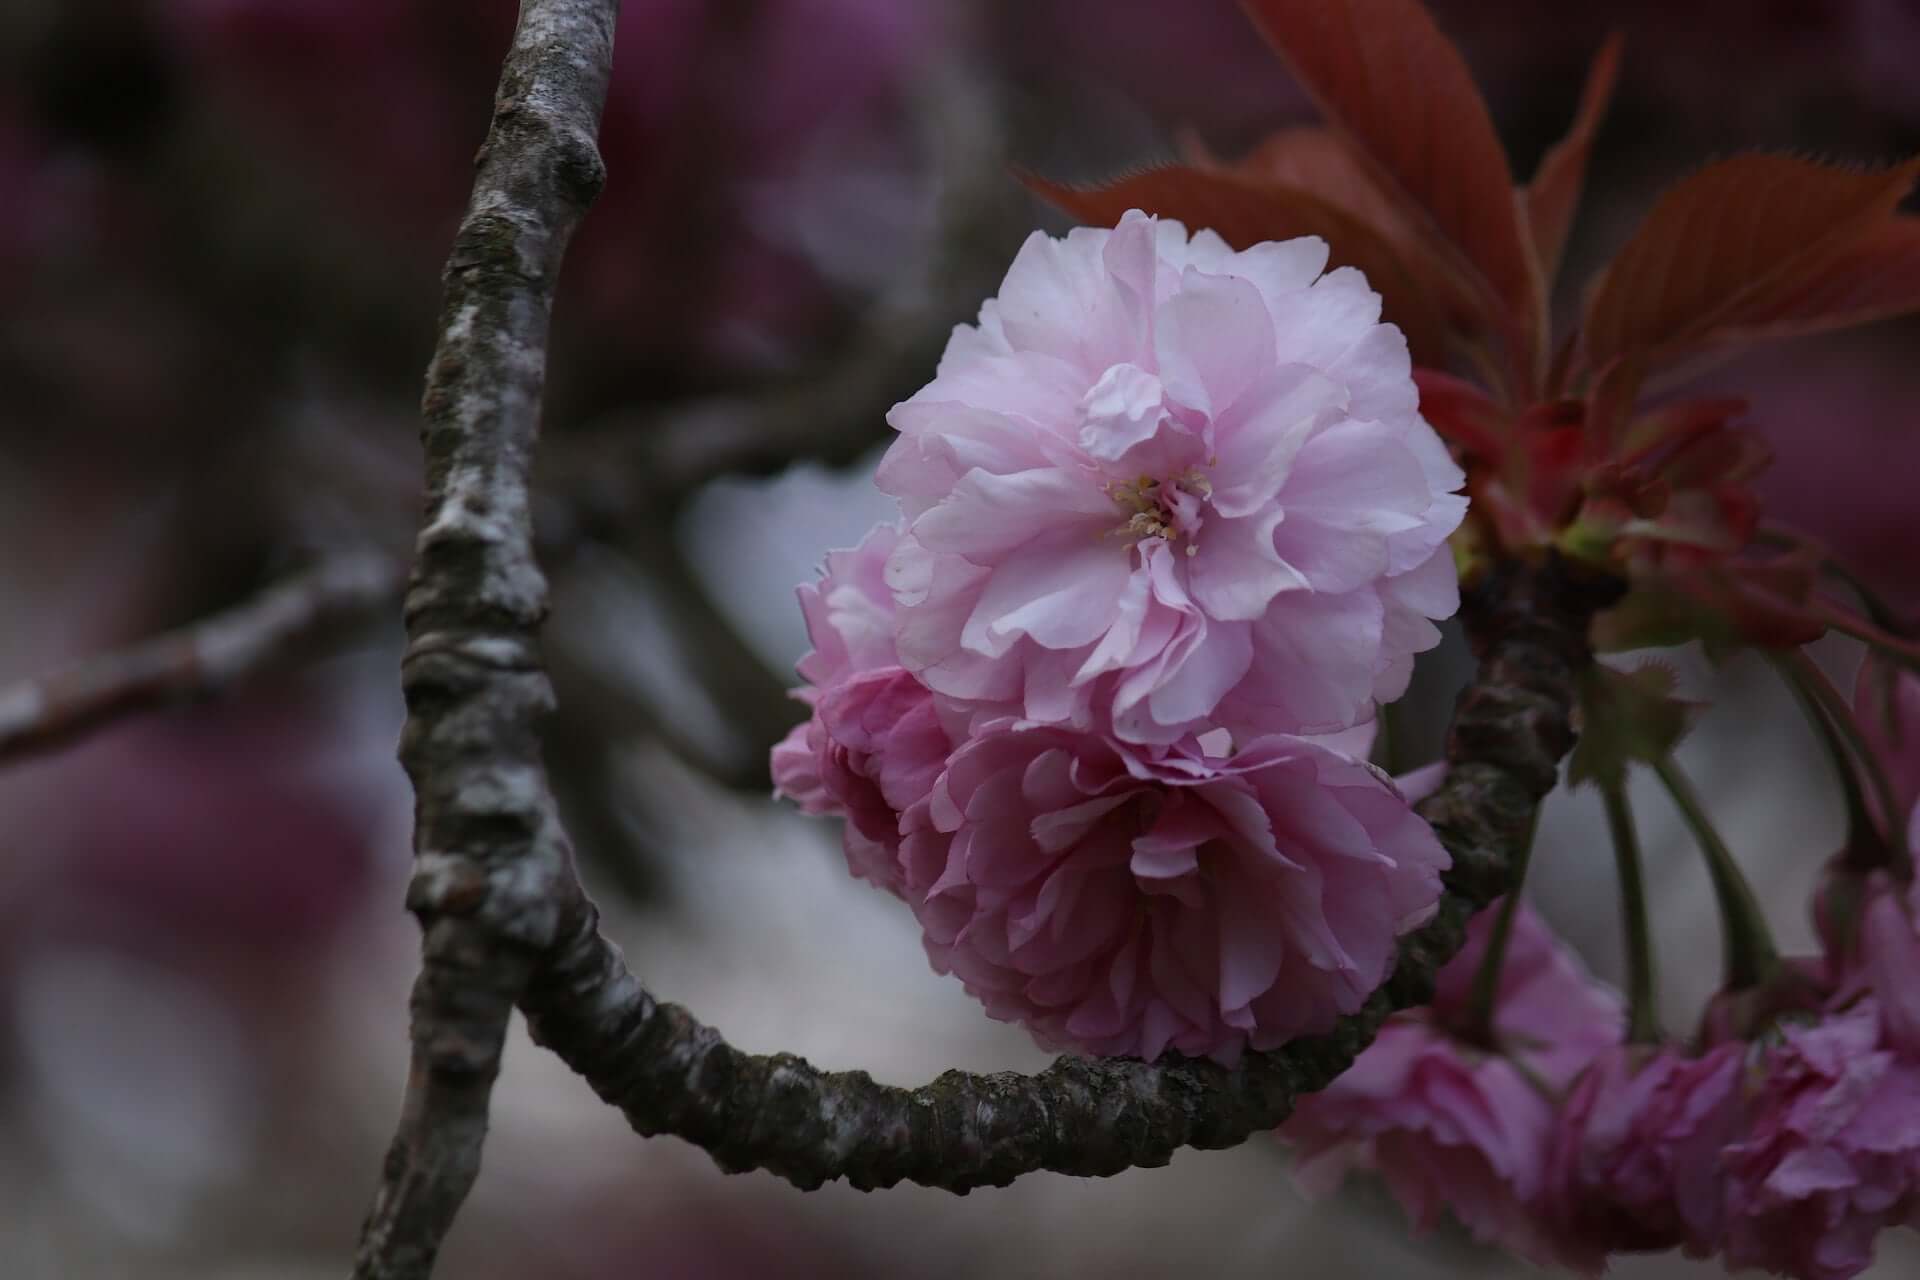 A bunch of pink flowers blooming on a branch.